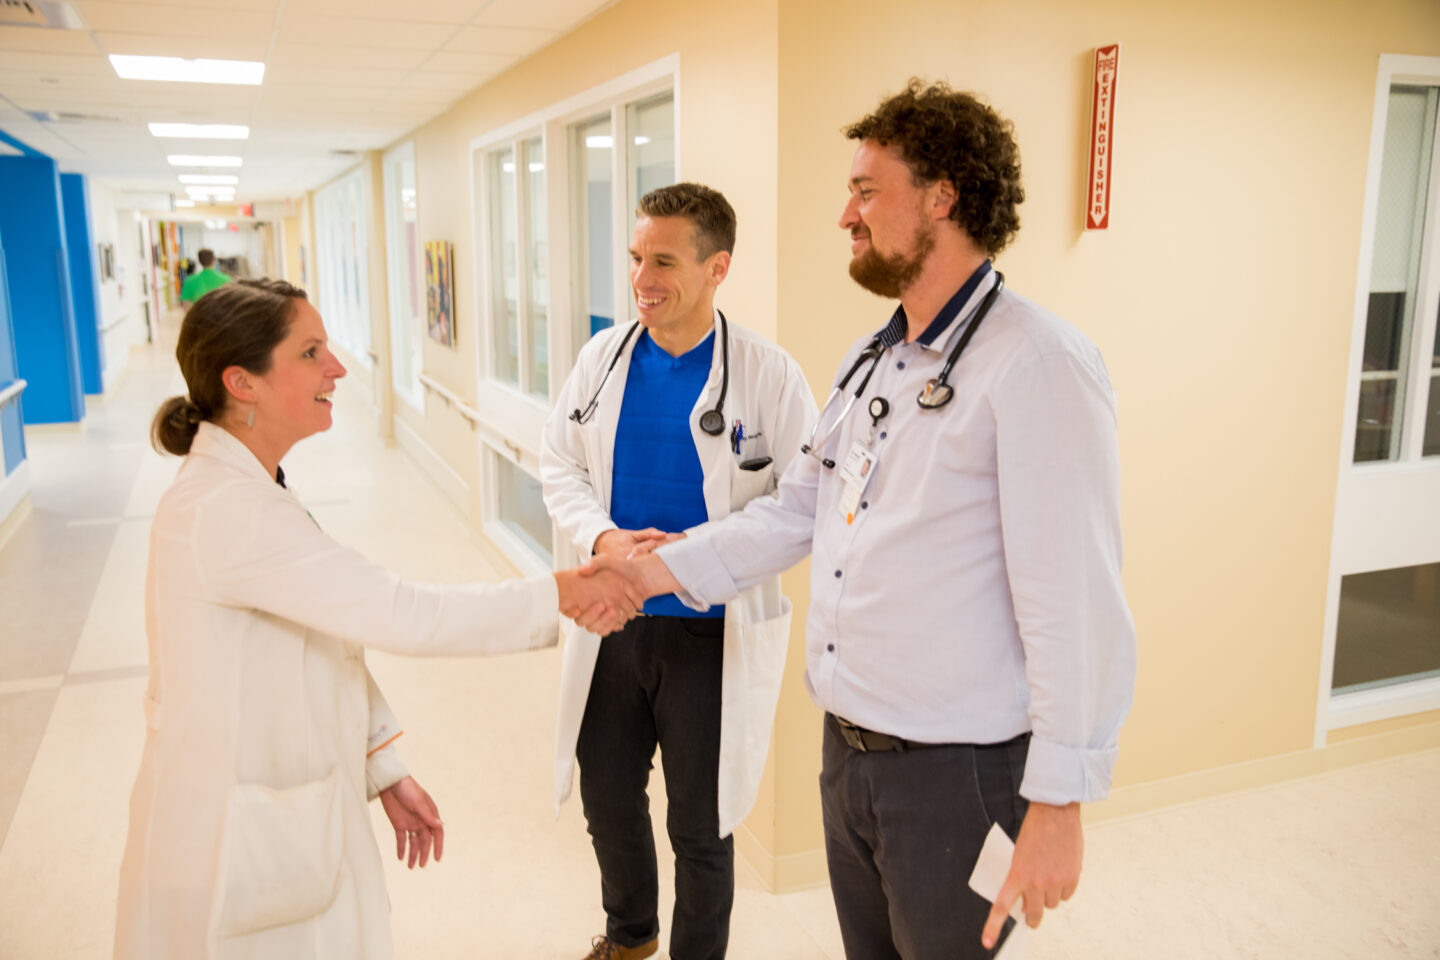 Mary Free Bed resident shakes hands with residency leadership